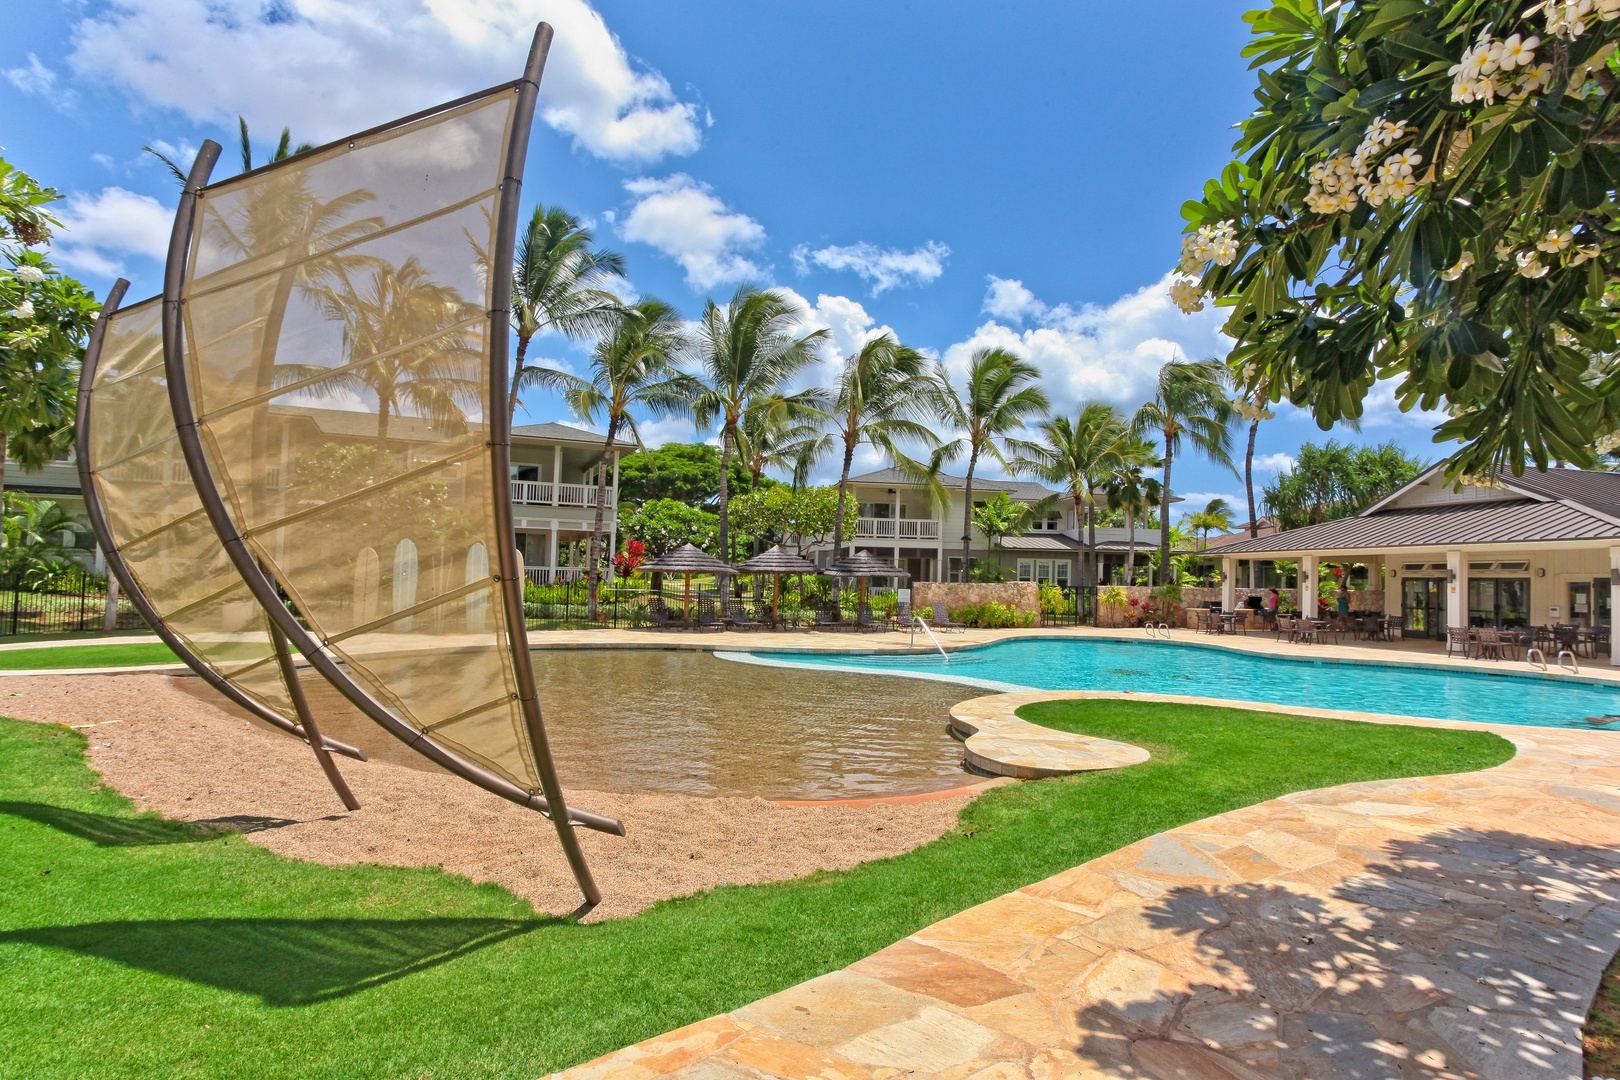 Kapolei Vacation Rentals, Coconut Plantation 1214-2 Aloha Lagoons - Go for a swim in the sparkling waters and rest in the lounge chairs at the community pool.